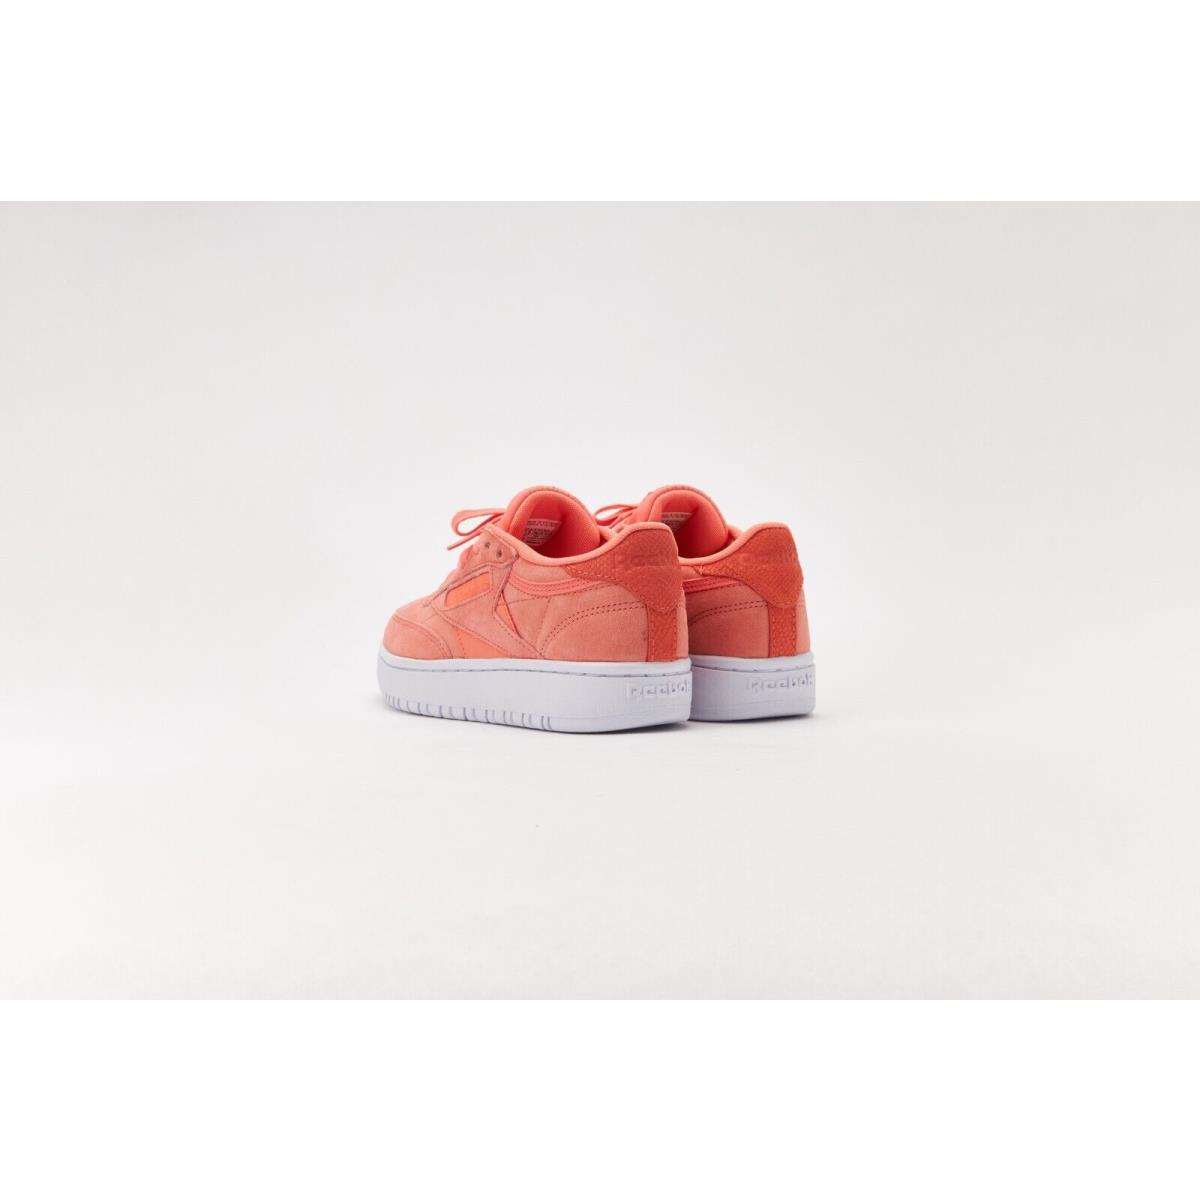 Reebok shoes Club Double - Twisted Coral/White 9